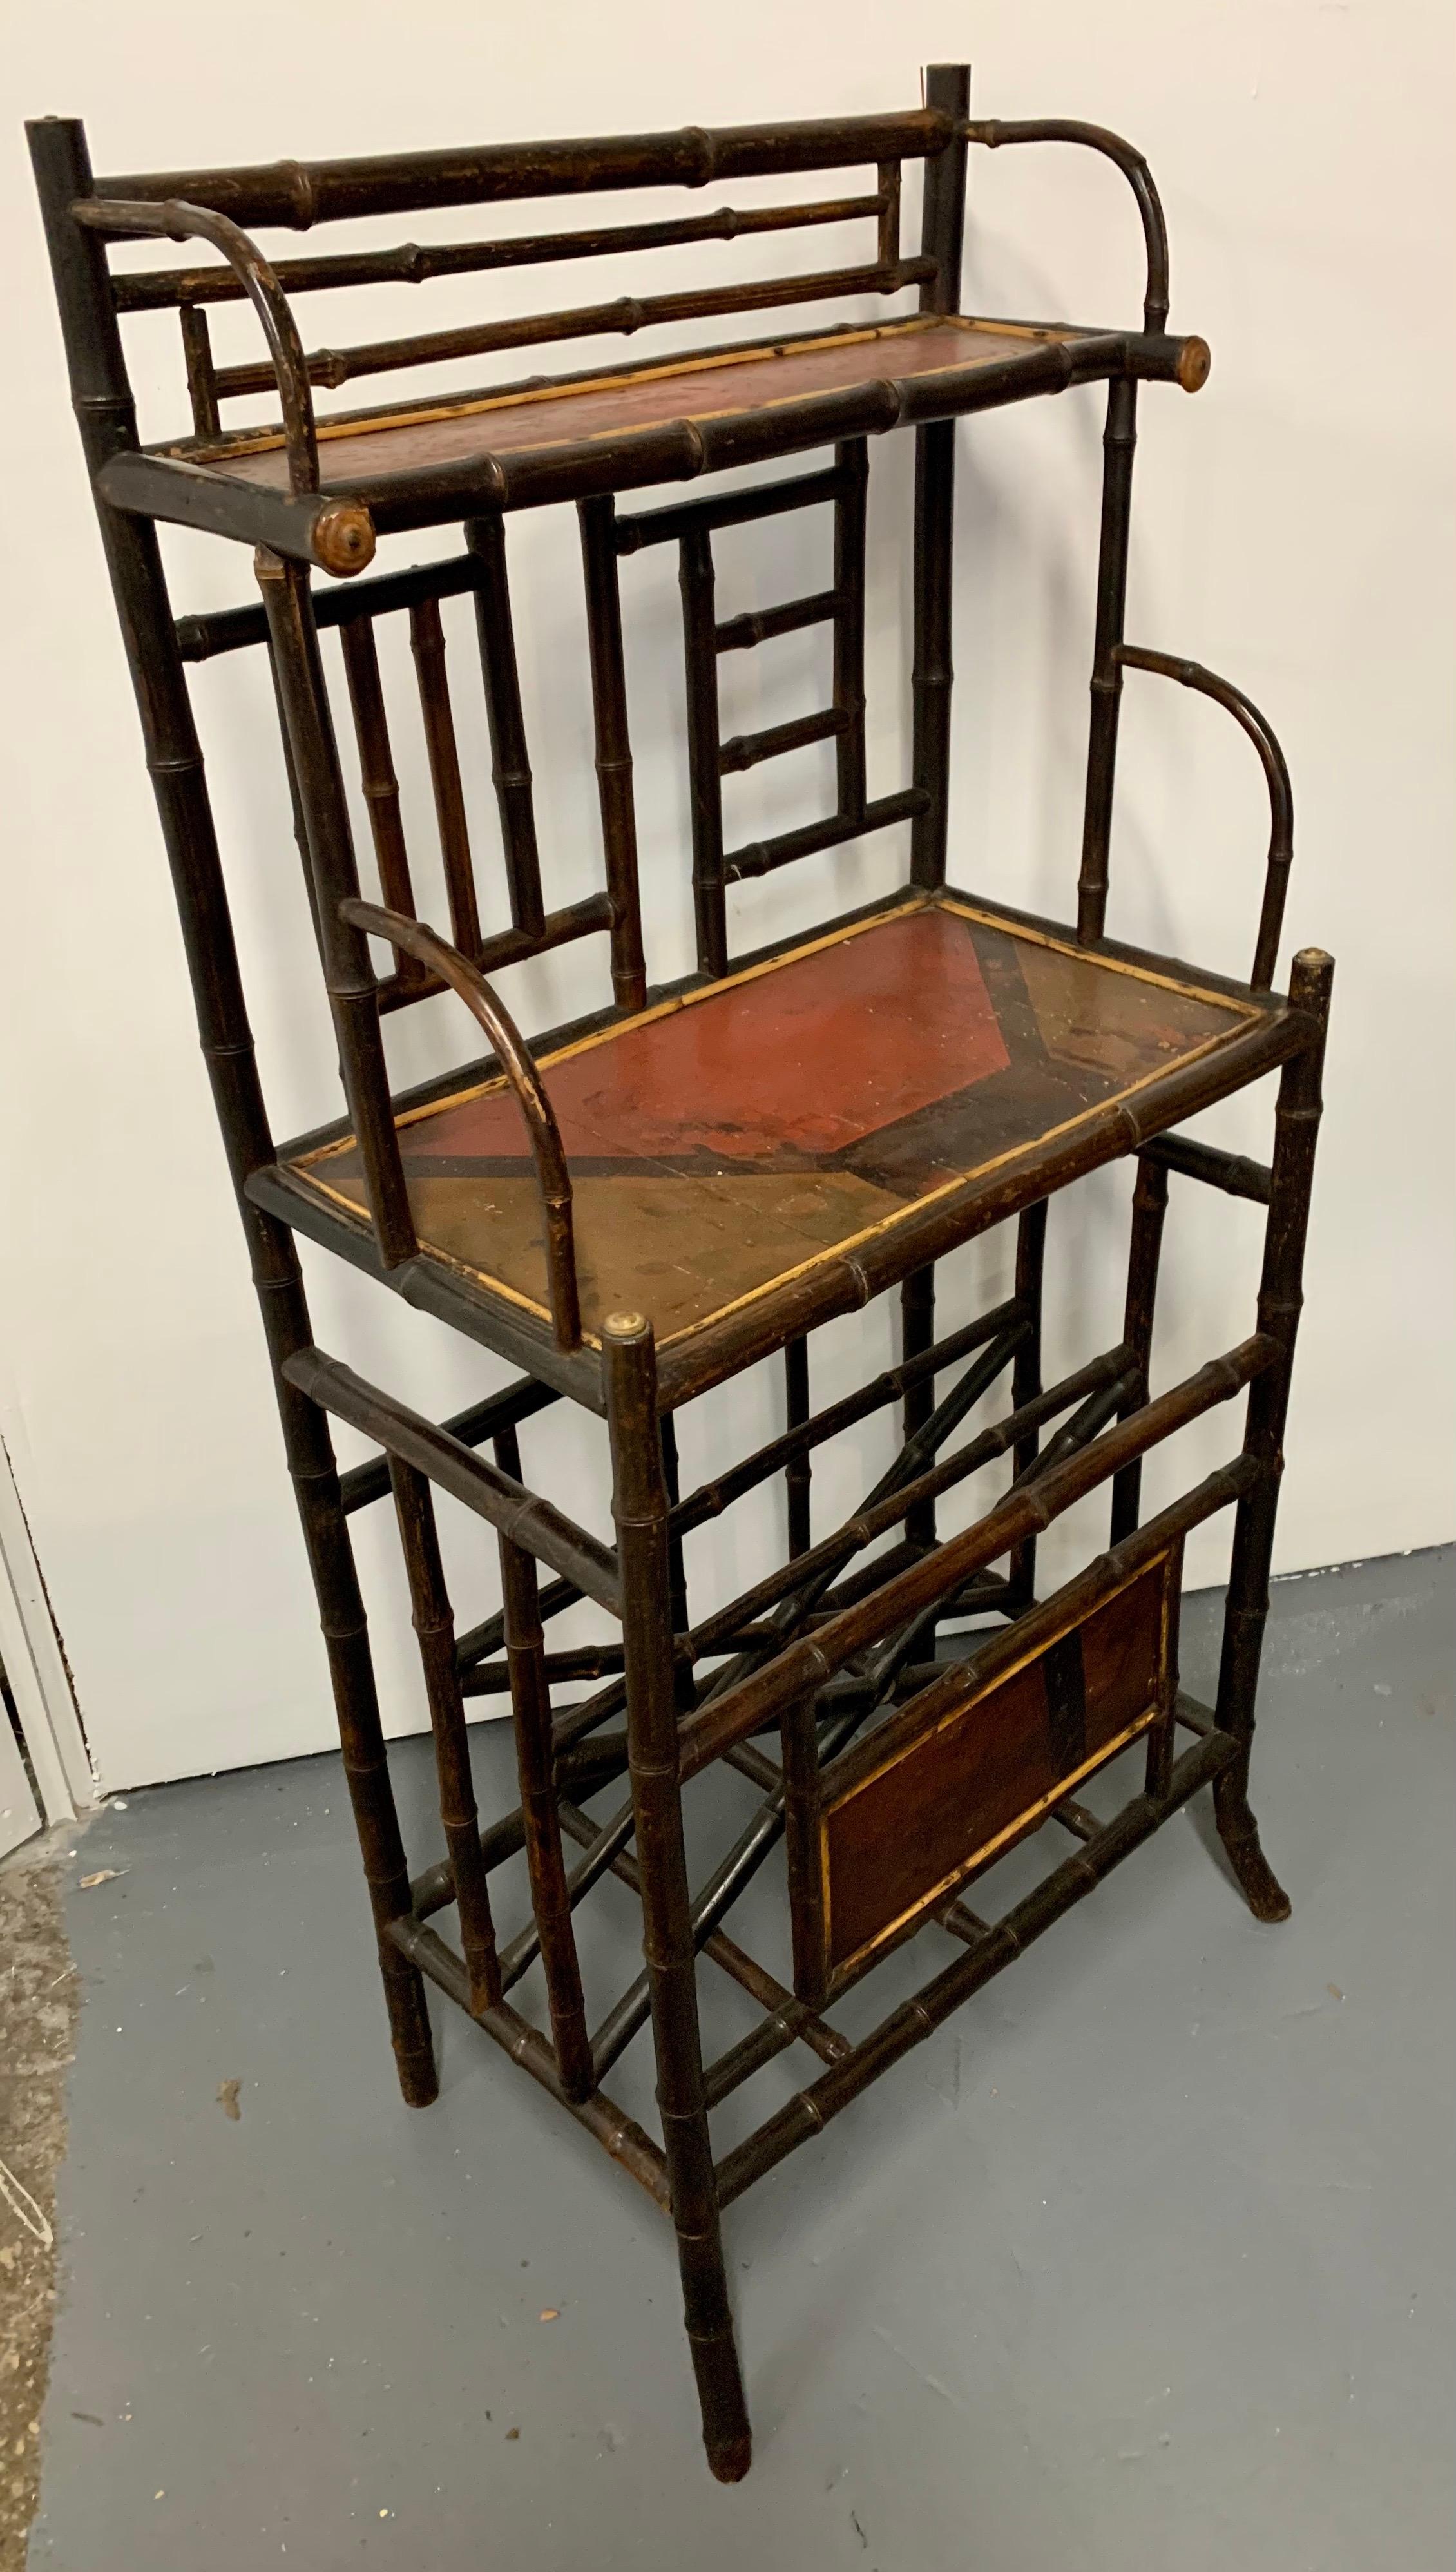 Antique bamboo etagere with painted shelves and front. Bottom portion has rack to hold newspapers or magazines.